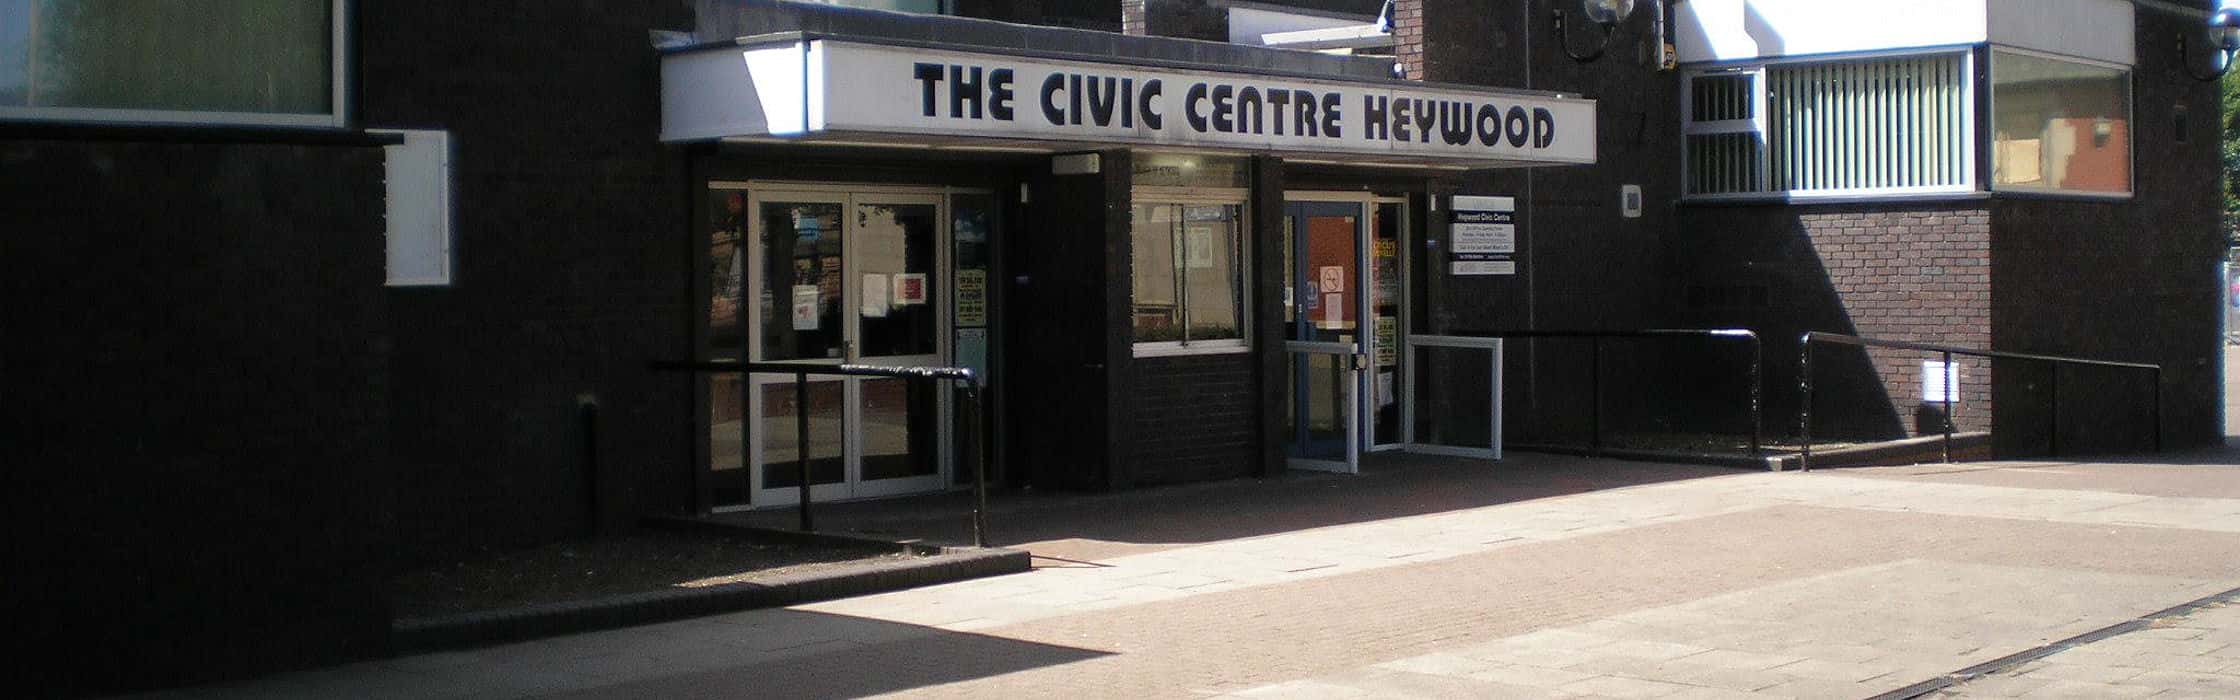 What's On at the Heywood Civic Centre, Heywood